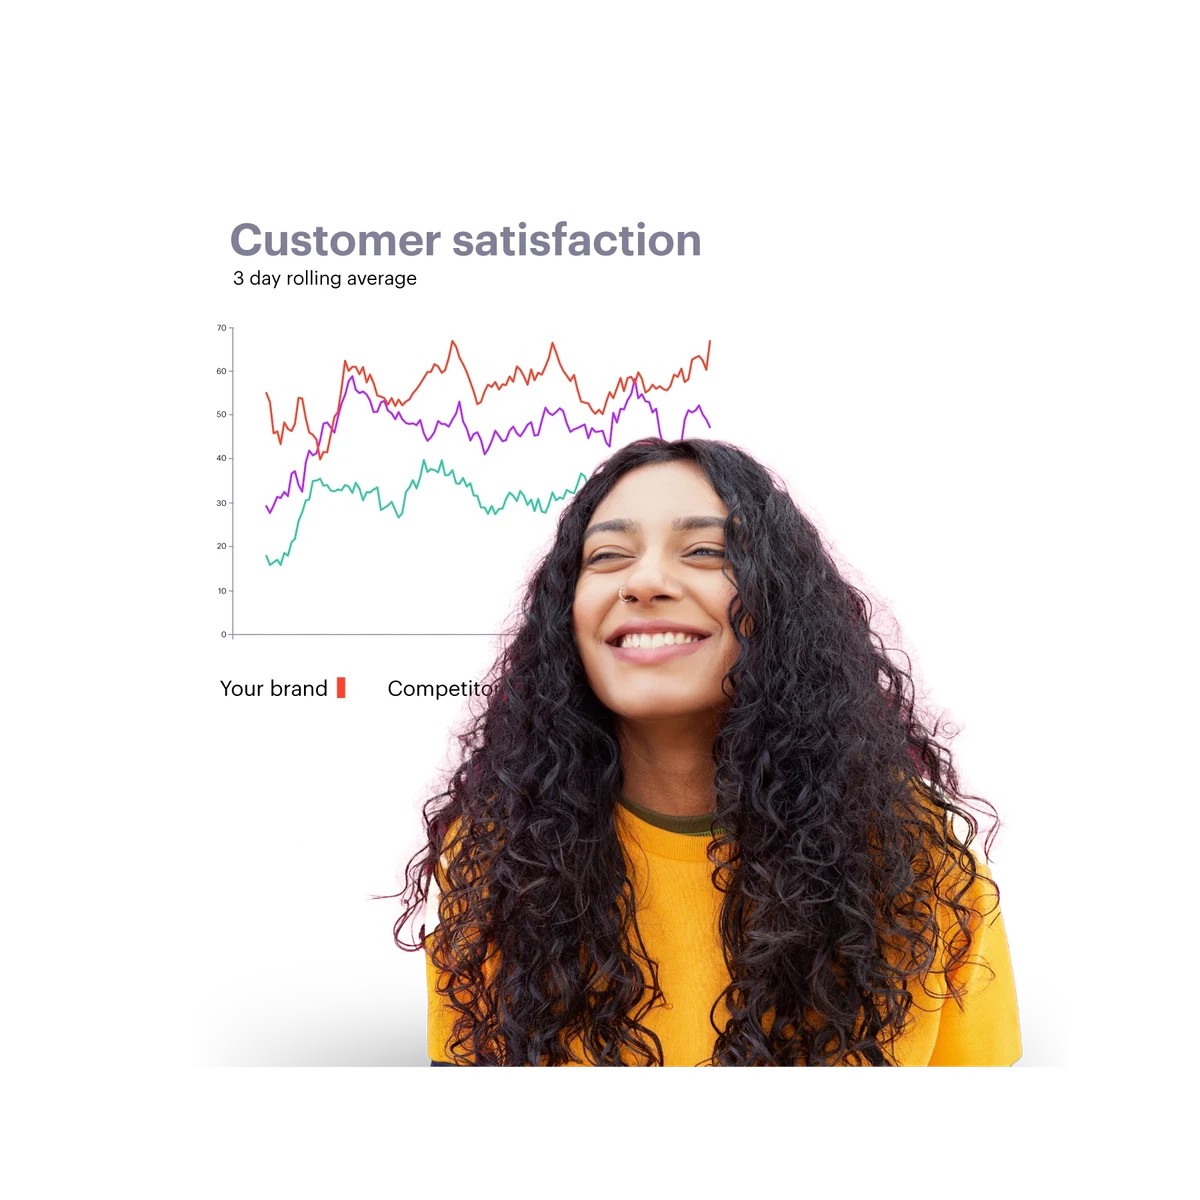 young girl with long dark curly hair and customer satisfaction data behind her